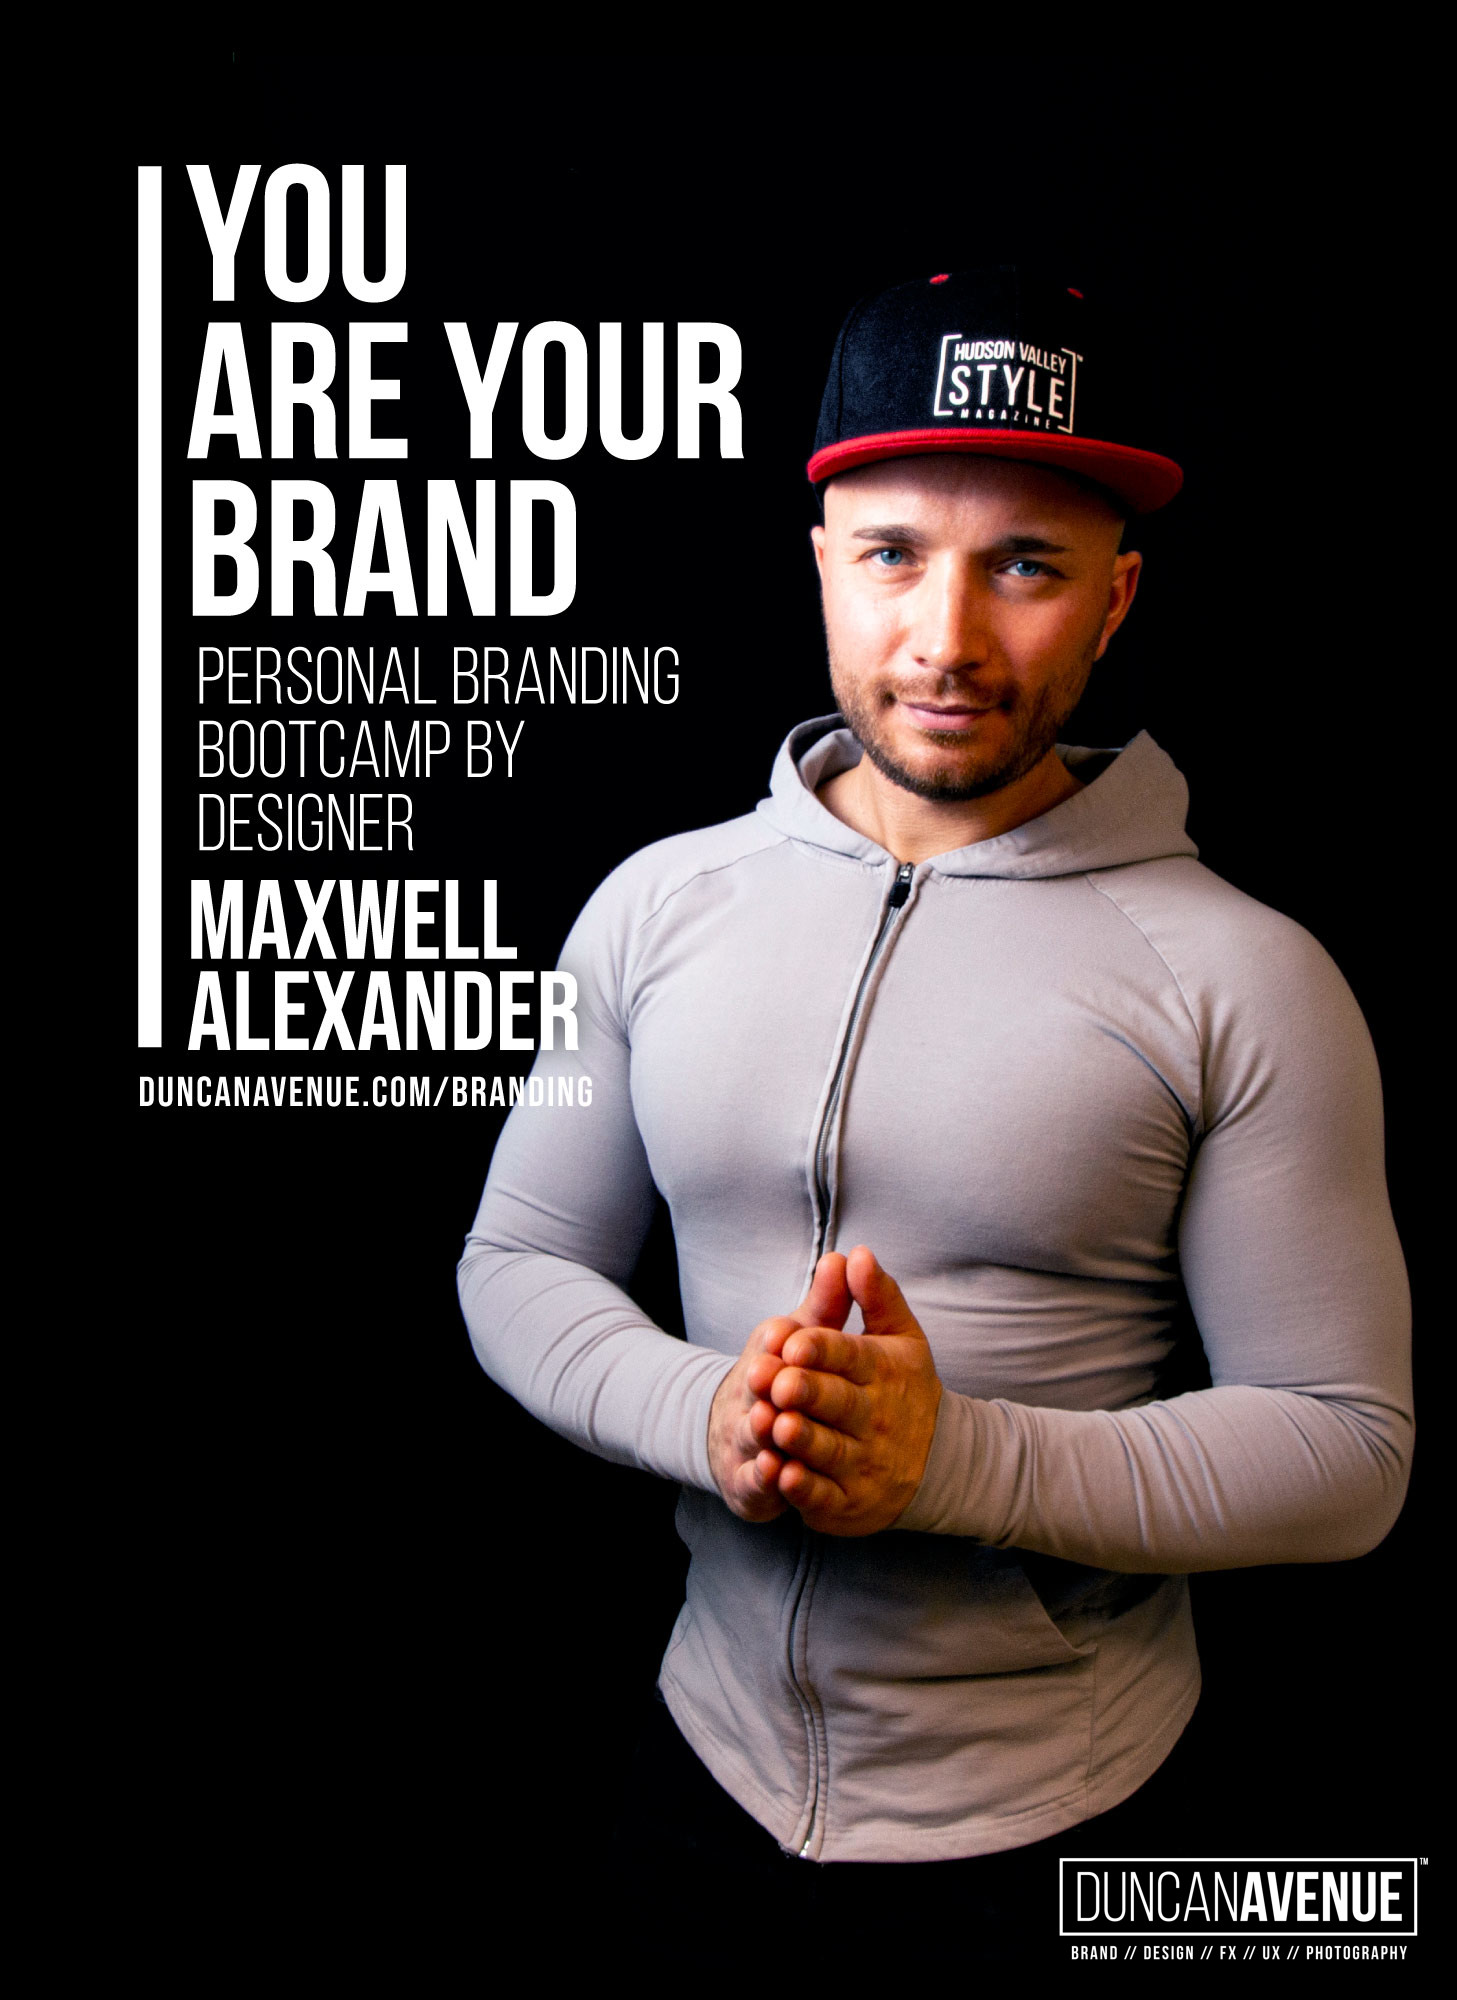 Is your personal brand Millennial enough? Top 5 personal branding tips to make your brand appeal to Millennials